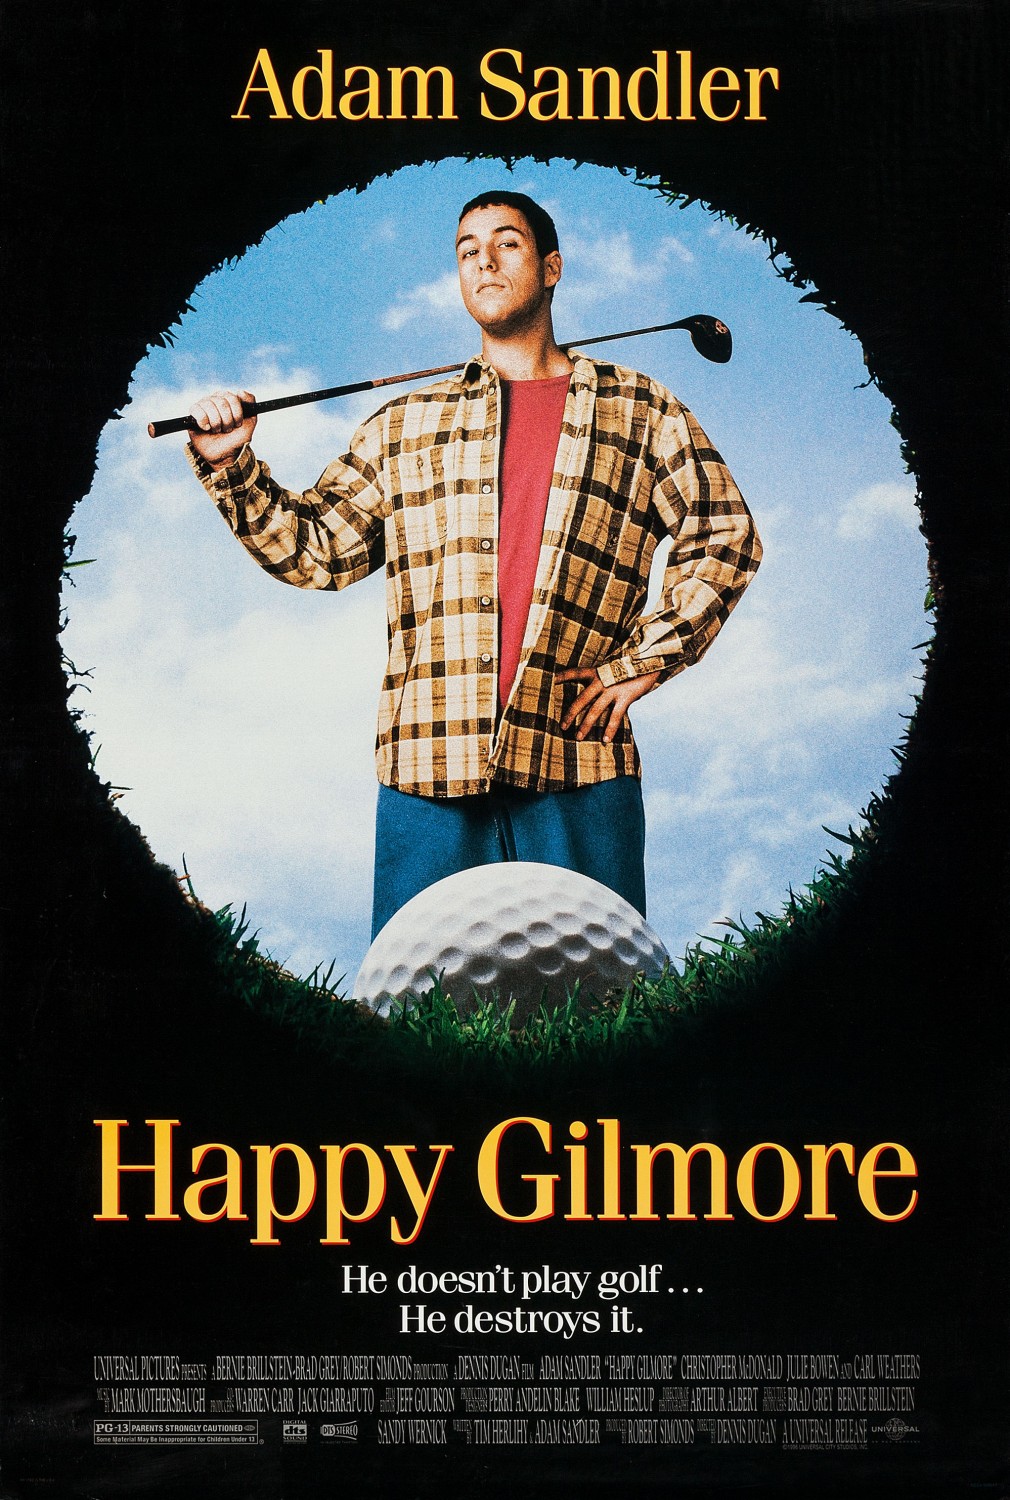 Film poster for HAPPY GILMORE (1996)